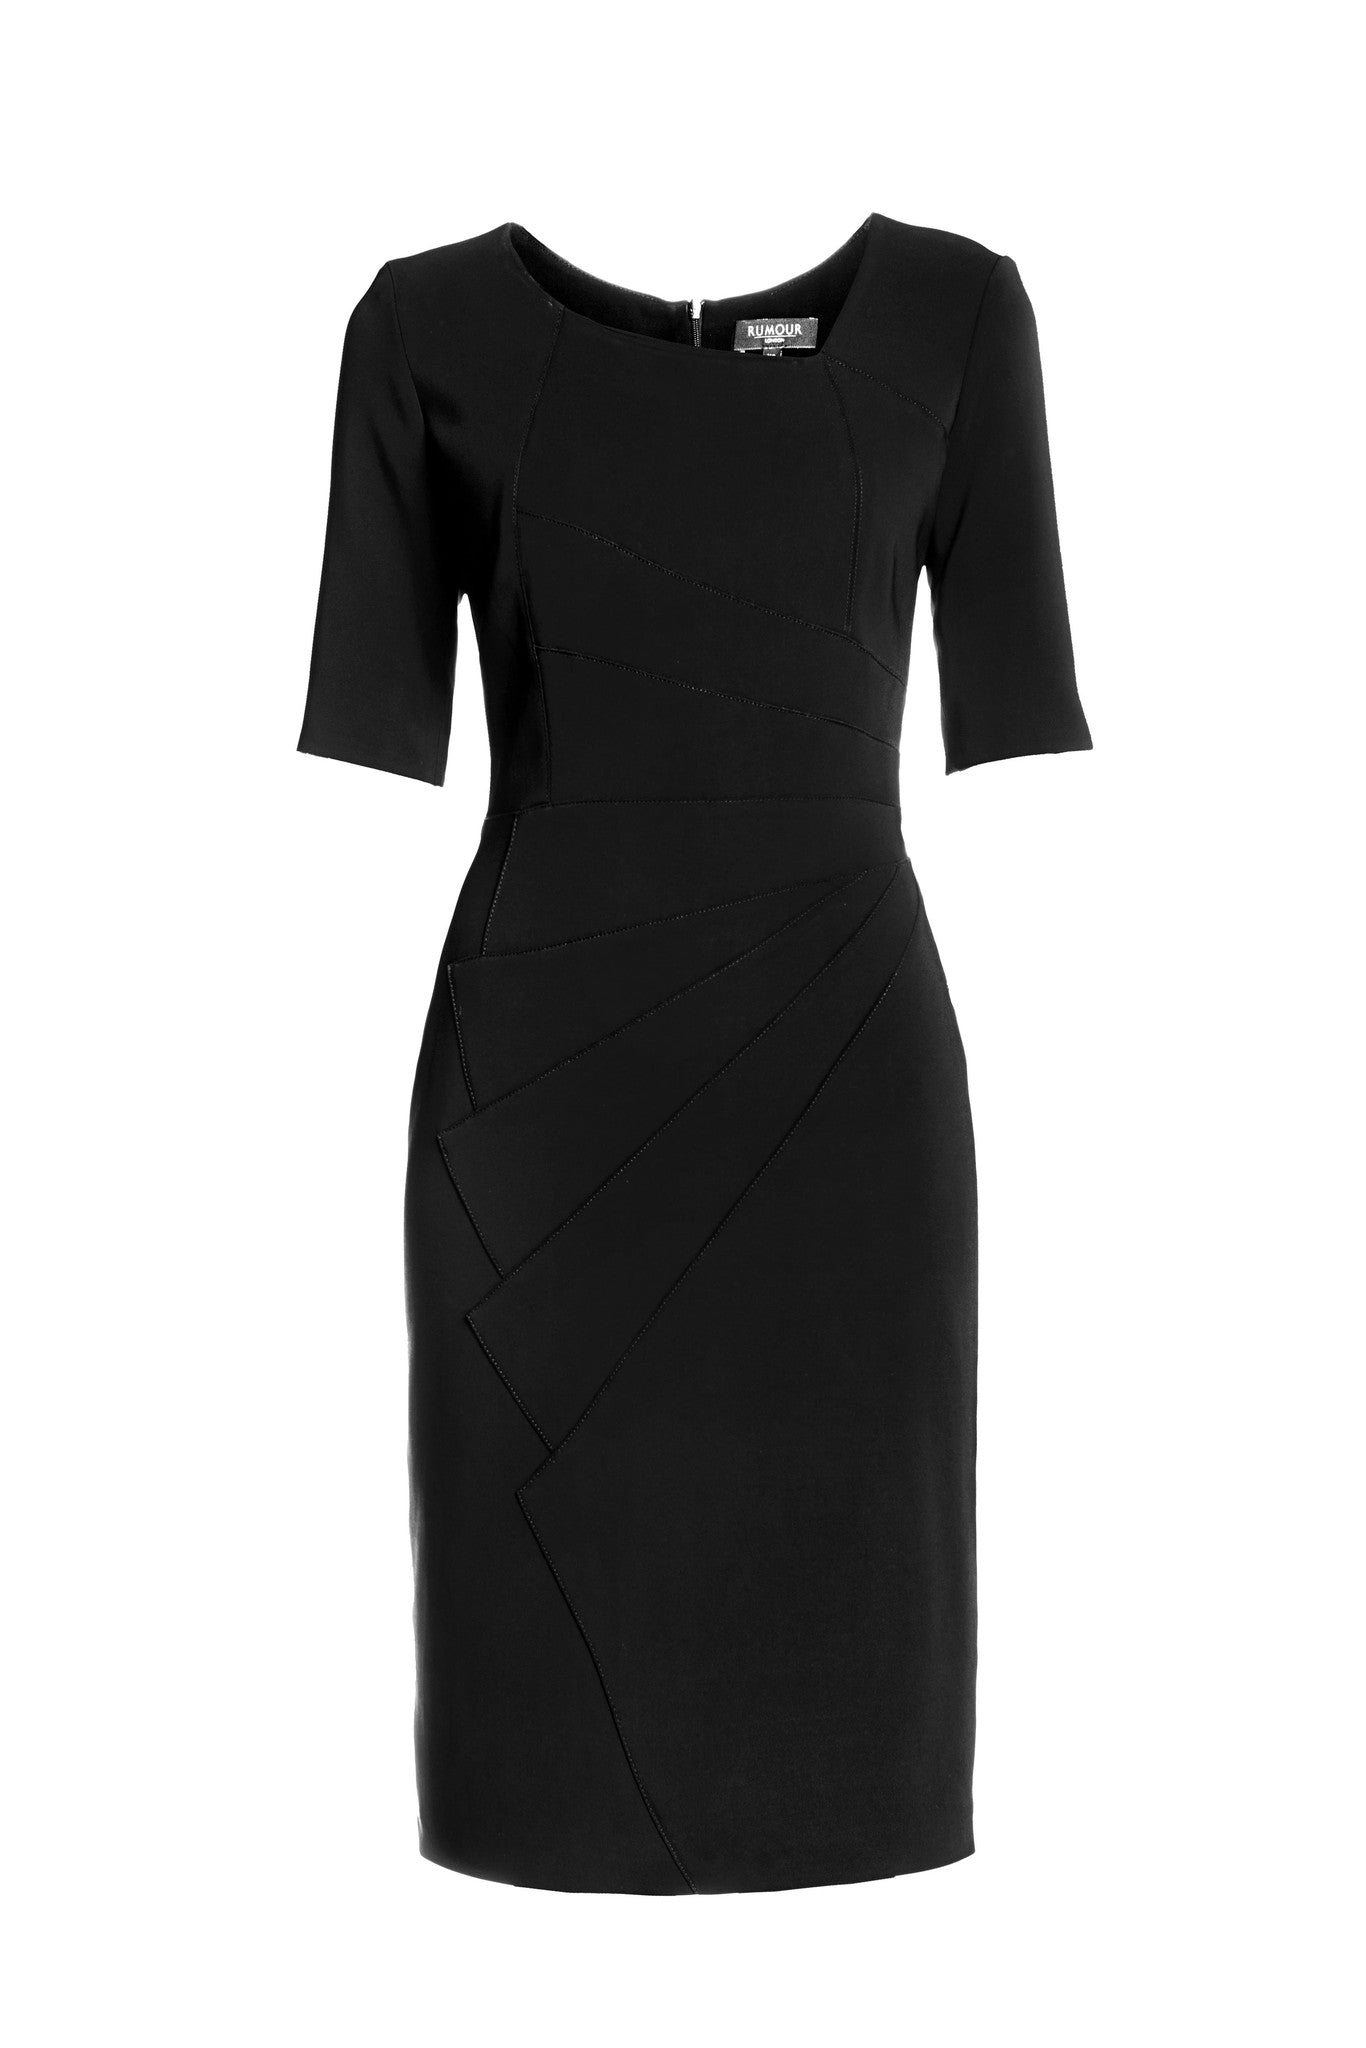 Black Fitted Knee Length Dress with Asymmetrical Neckline – RUMOUR LONDON